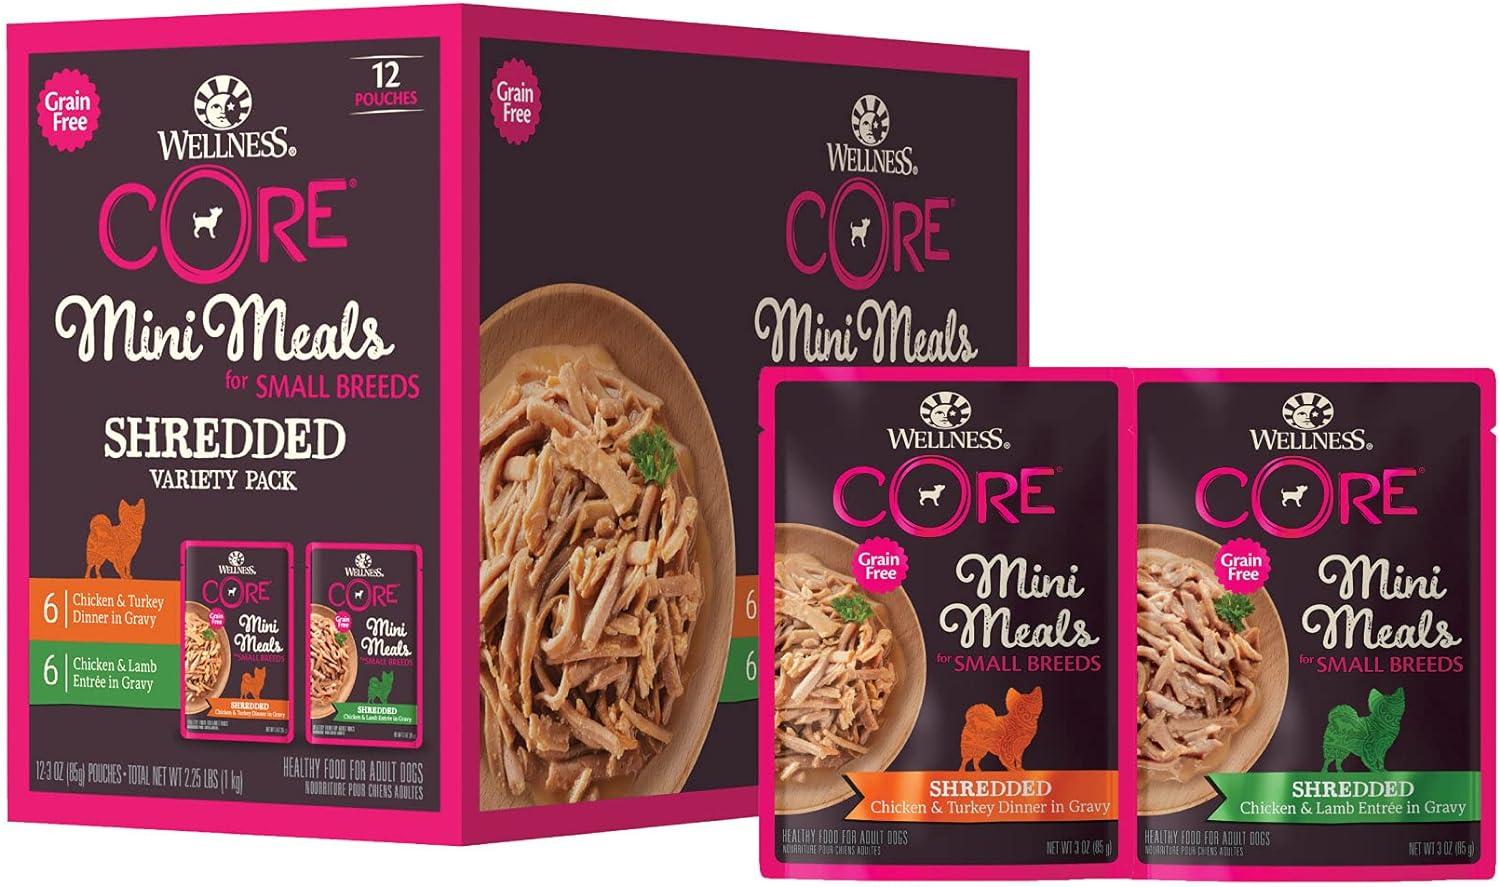 Wellness Core Natural Mini Wet Dog Meal 24 Pack for $13.98